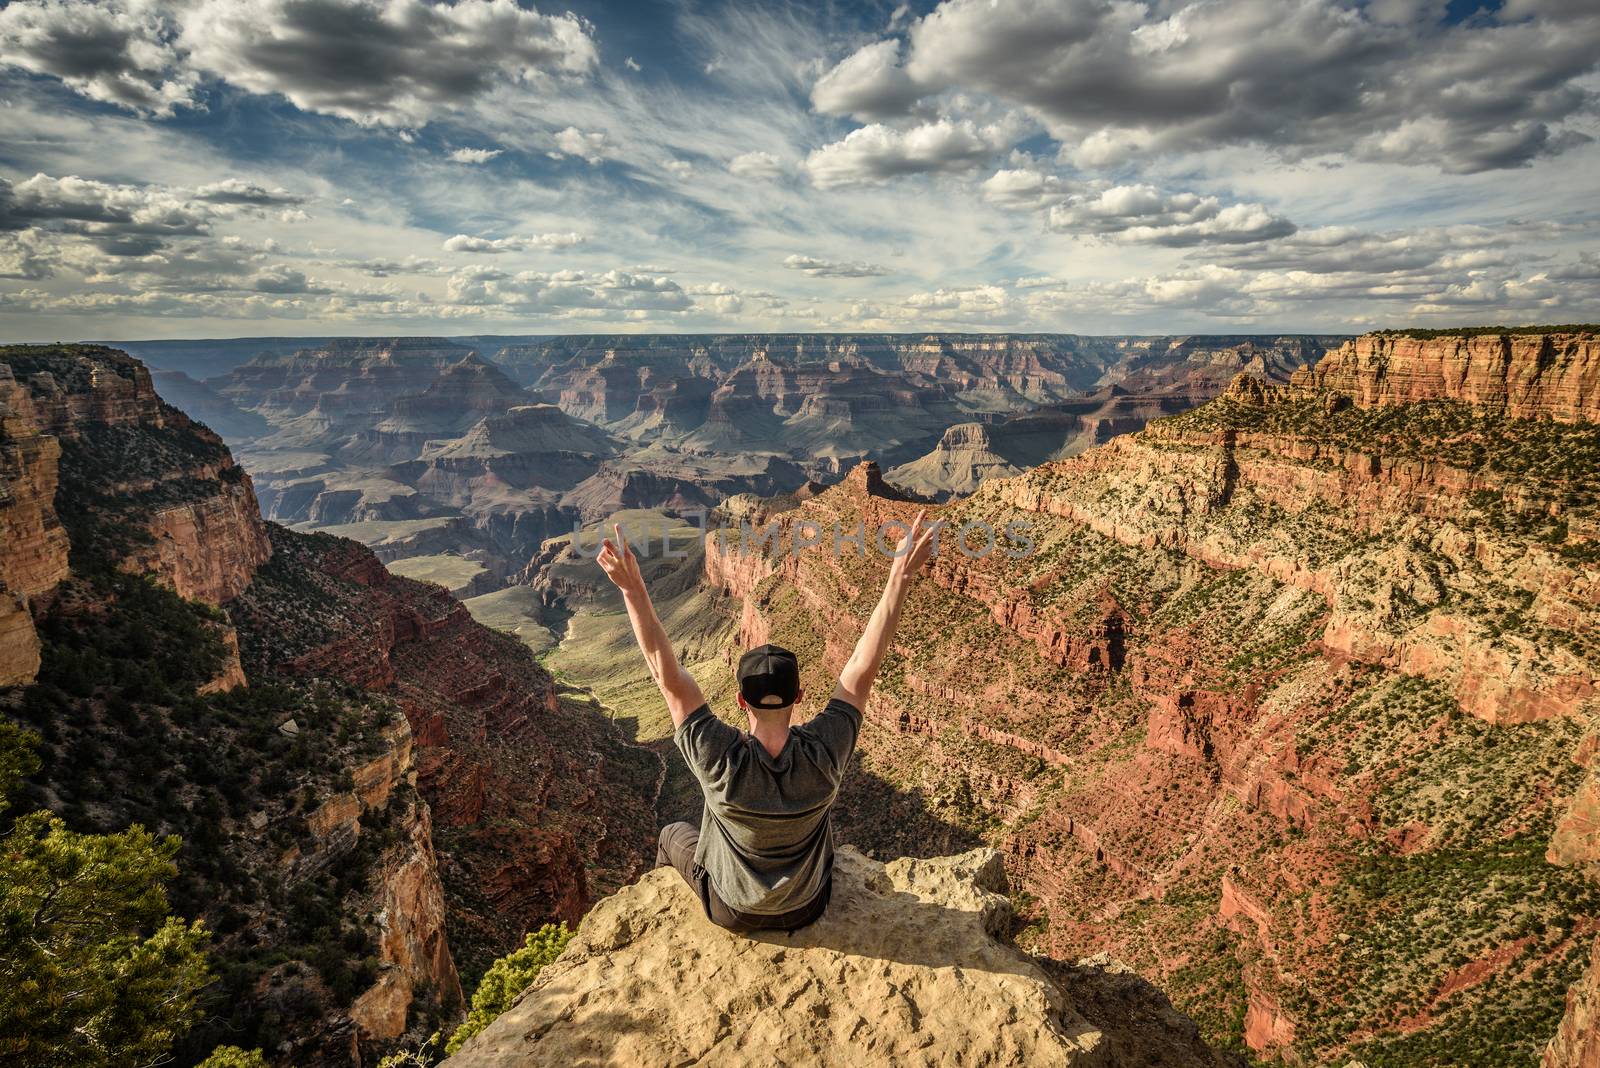 Grand Canyon and a happy hiker by nickfox